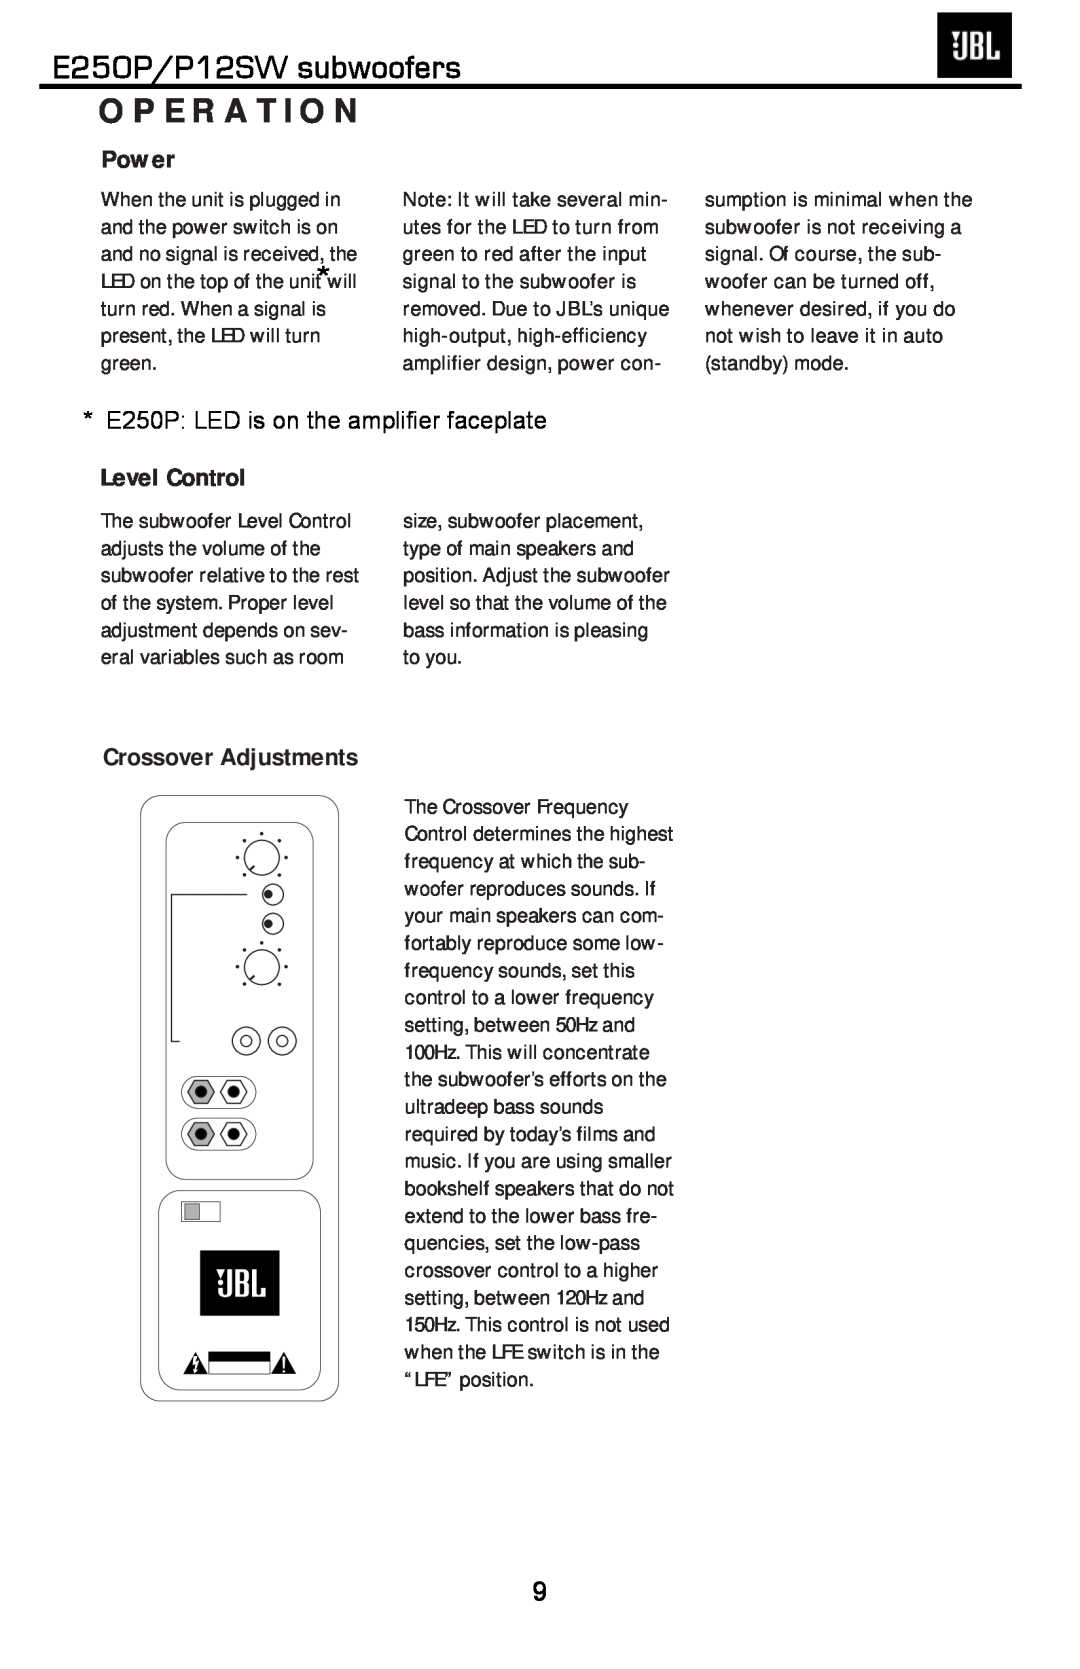 JBL service manual Operation, E250P/P12SW subwoofers, Power, Level Control, Crossover Adjustments 